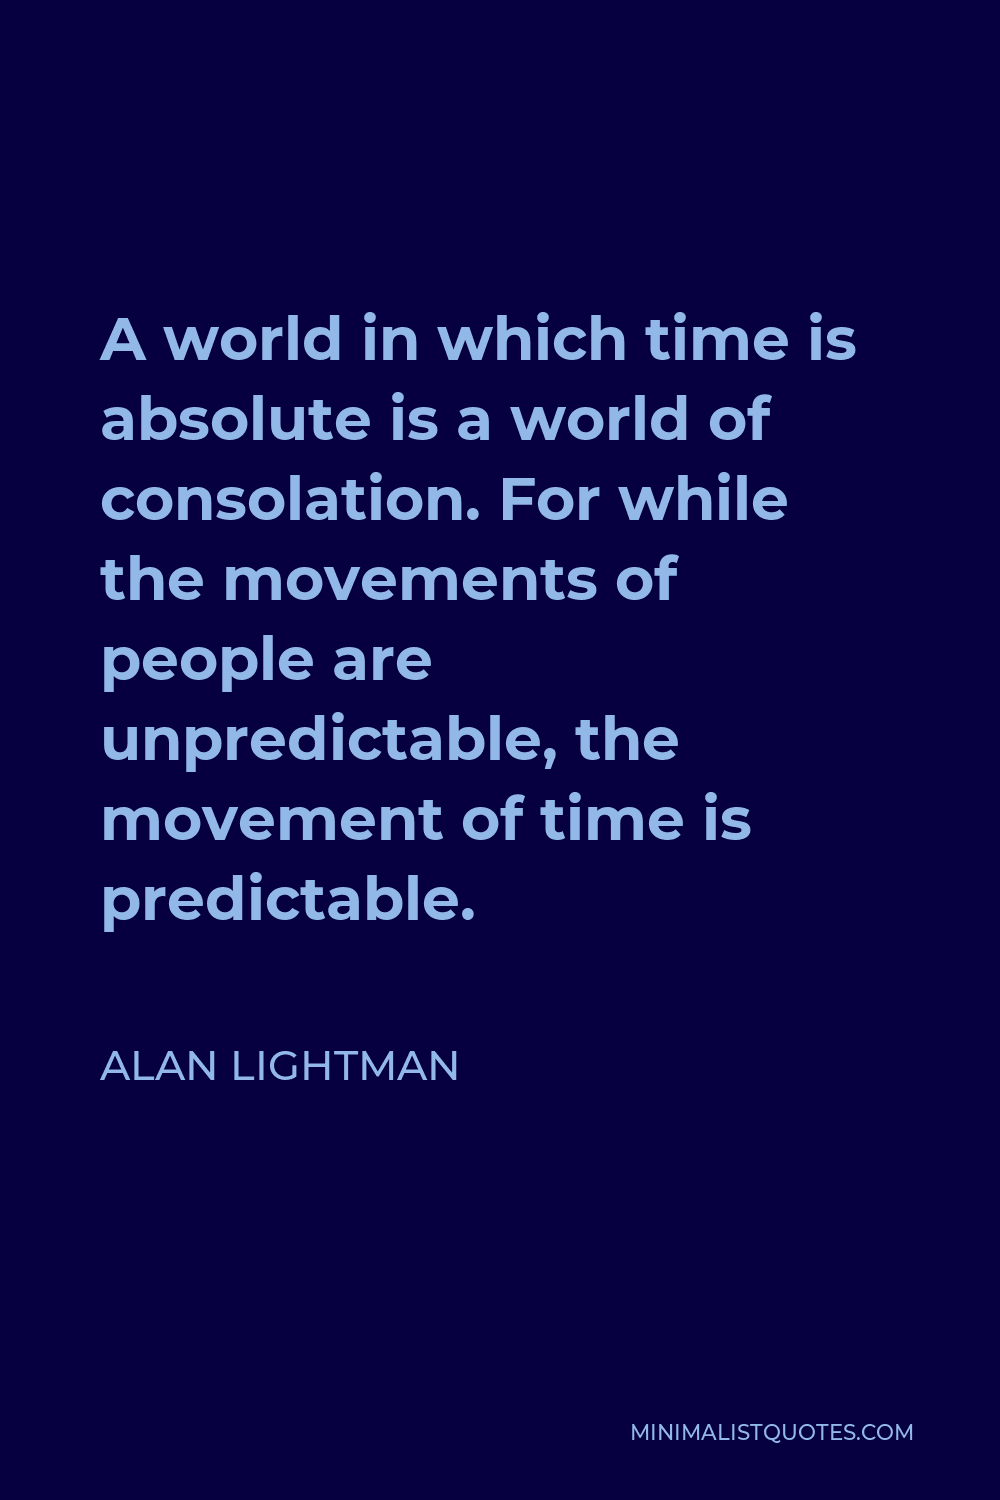 Alan Lightman Quote - A world in which time is absolute is a world of consolation.